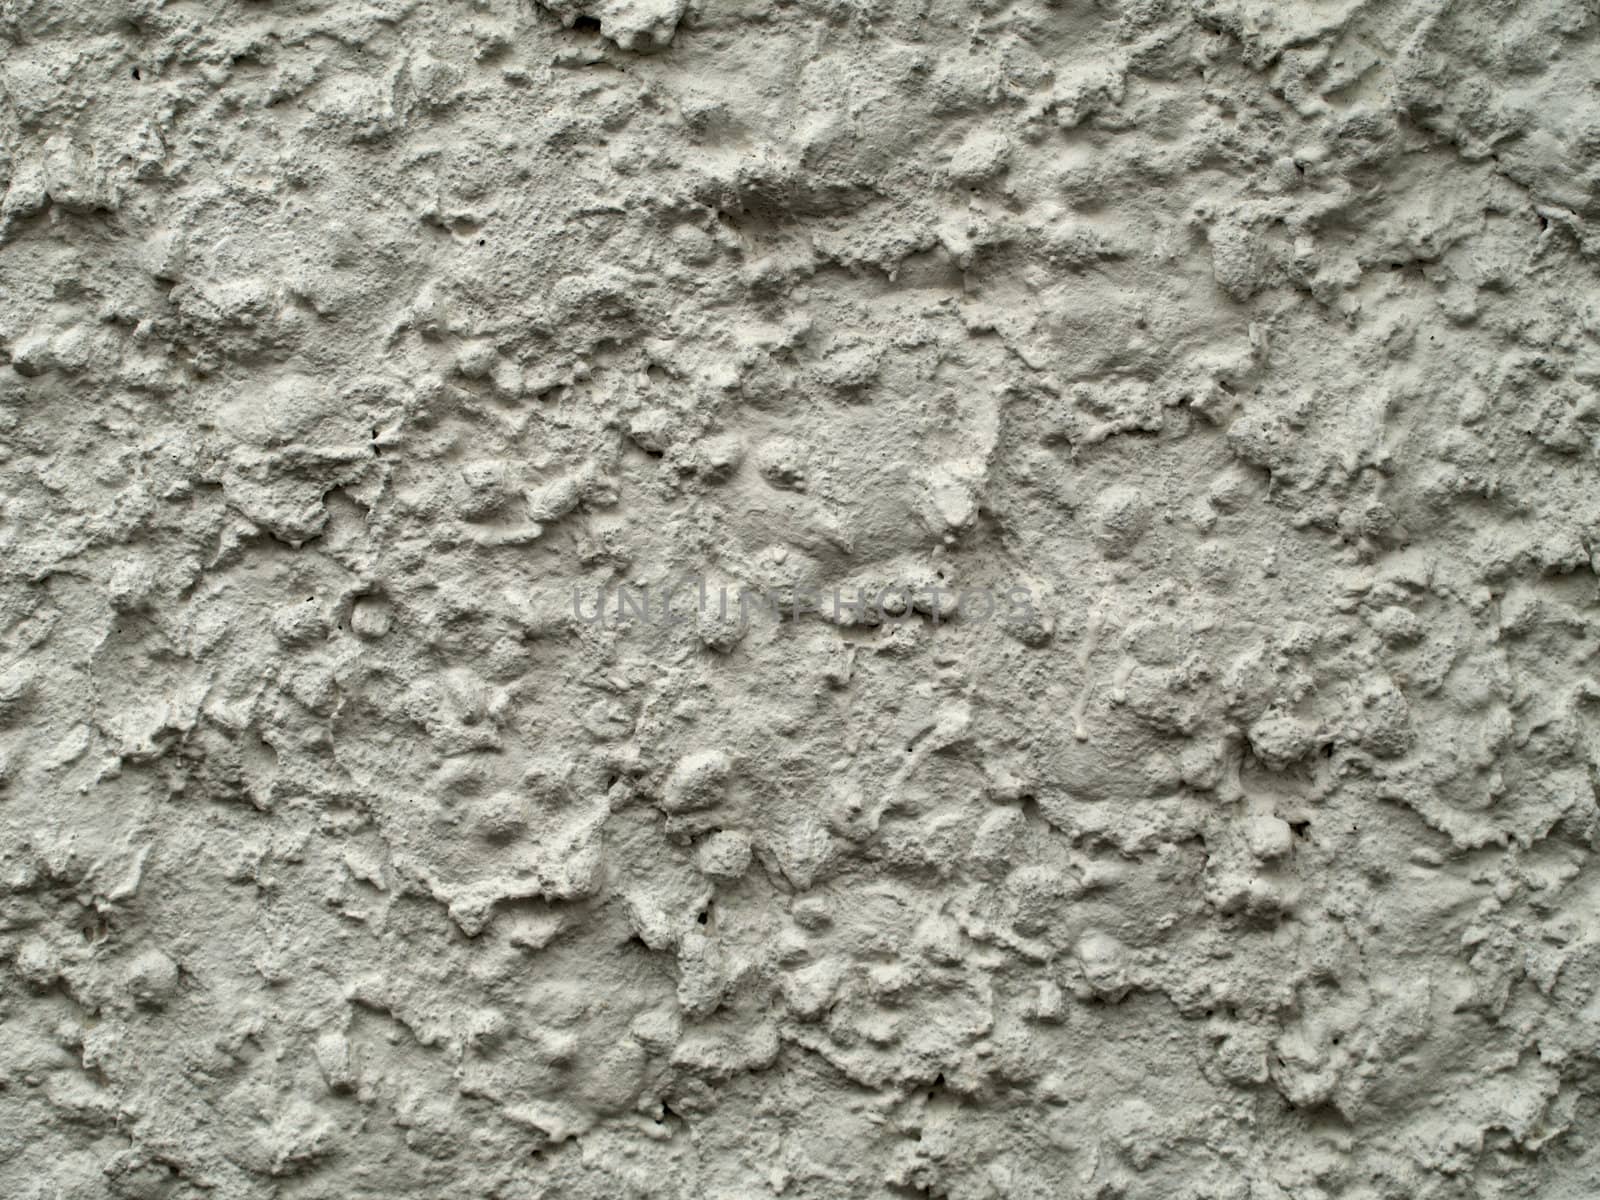 A stone texture